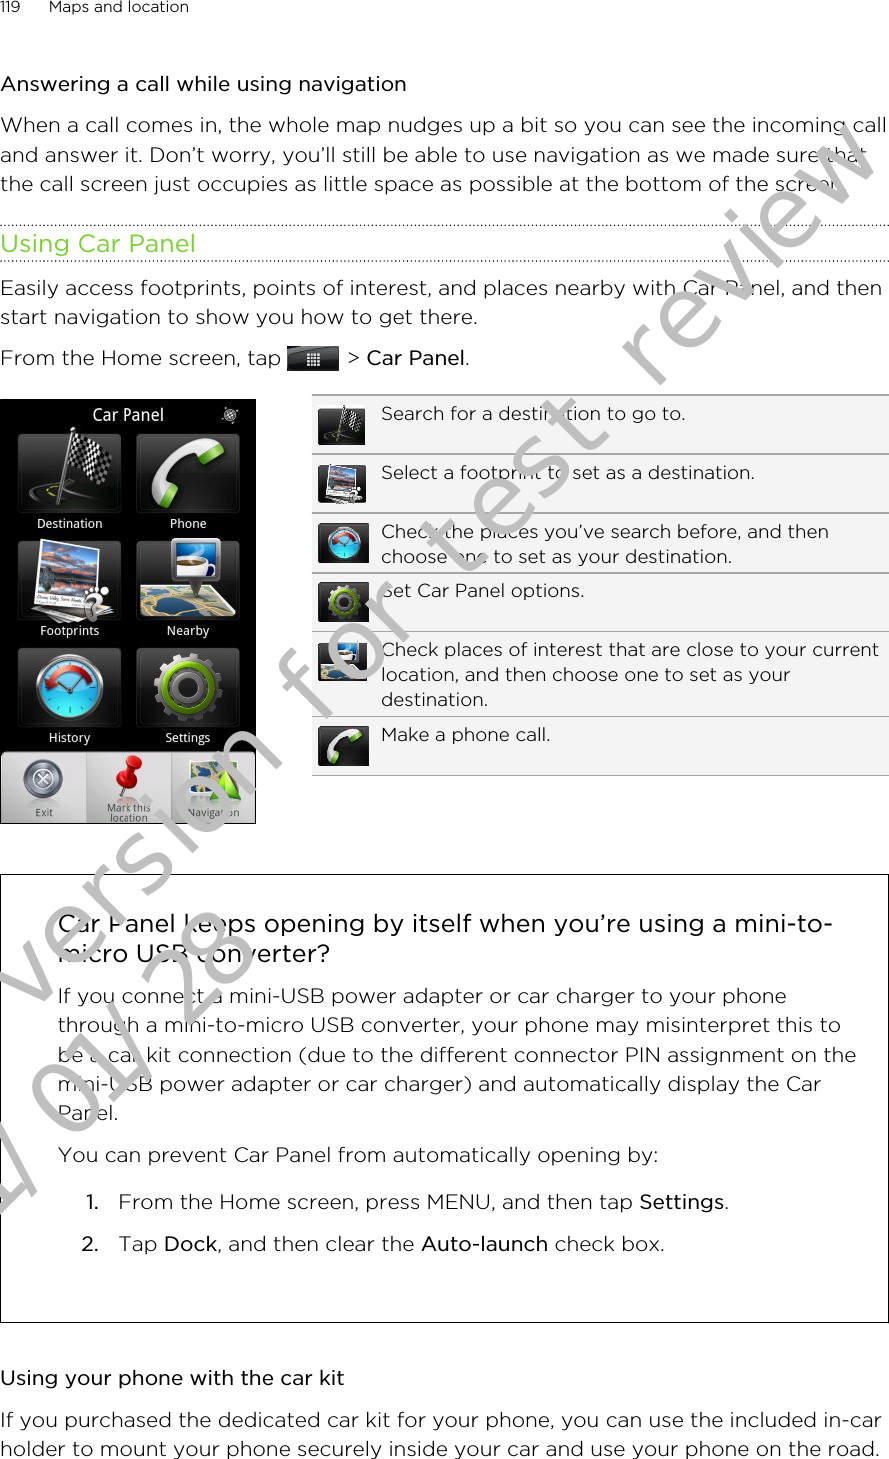 Answering a call while using navigationWhen a call comes in, the whole map nudges up a bit so you can see the incoming calland answer it. Don’t worry, you’ll still be able to use navigation as we made sure thatthe call screen just occupies as little space as possible at the bottom of the screen.Using Car PanelEasily access footprints, points of interest, and places nearby with Car Panel, and thenstart navigation to show you how to get there.From the Home screen, tap   &gt; Car Panel.Search for a destination to go to.Select a footprint to set as a destination.Check the places you’ve search before, and thenchoose one to set as your destination.Set Car Panel options.Check places of interest that are close to your currentlocation, and then choose one to set as yourdestination.Make a phone call.Car Panel keeps opening by itself when you’re using a mini-to-micro USB converter?If you connect a mini-USB power adapter or car charger to your phonethrough a mini-to-micro USB converter, your phone may misinterpret this tobe a car kit connection (due to the different connector PIN assignment on themini-USB power adapter or car charger) and automatically display the CarPanel.You can prevent Car Panel from automatically opening by:1. From the Home screen, press MENU, and then tap Settings.2. Tap Dock, and then clear the Auto-launch check box.Using your phone with the car kitIf you purchased the dedicated car kit for your phone, you can use the included in-carholder to mount your phone securely inside your car and use your phone on the road.119 Maps and locationDraft version for test review 2011/01/28 